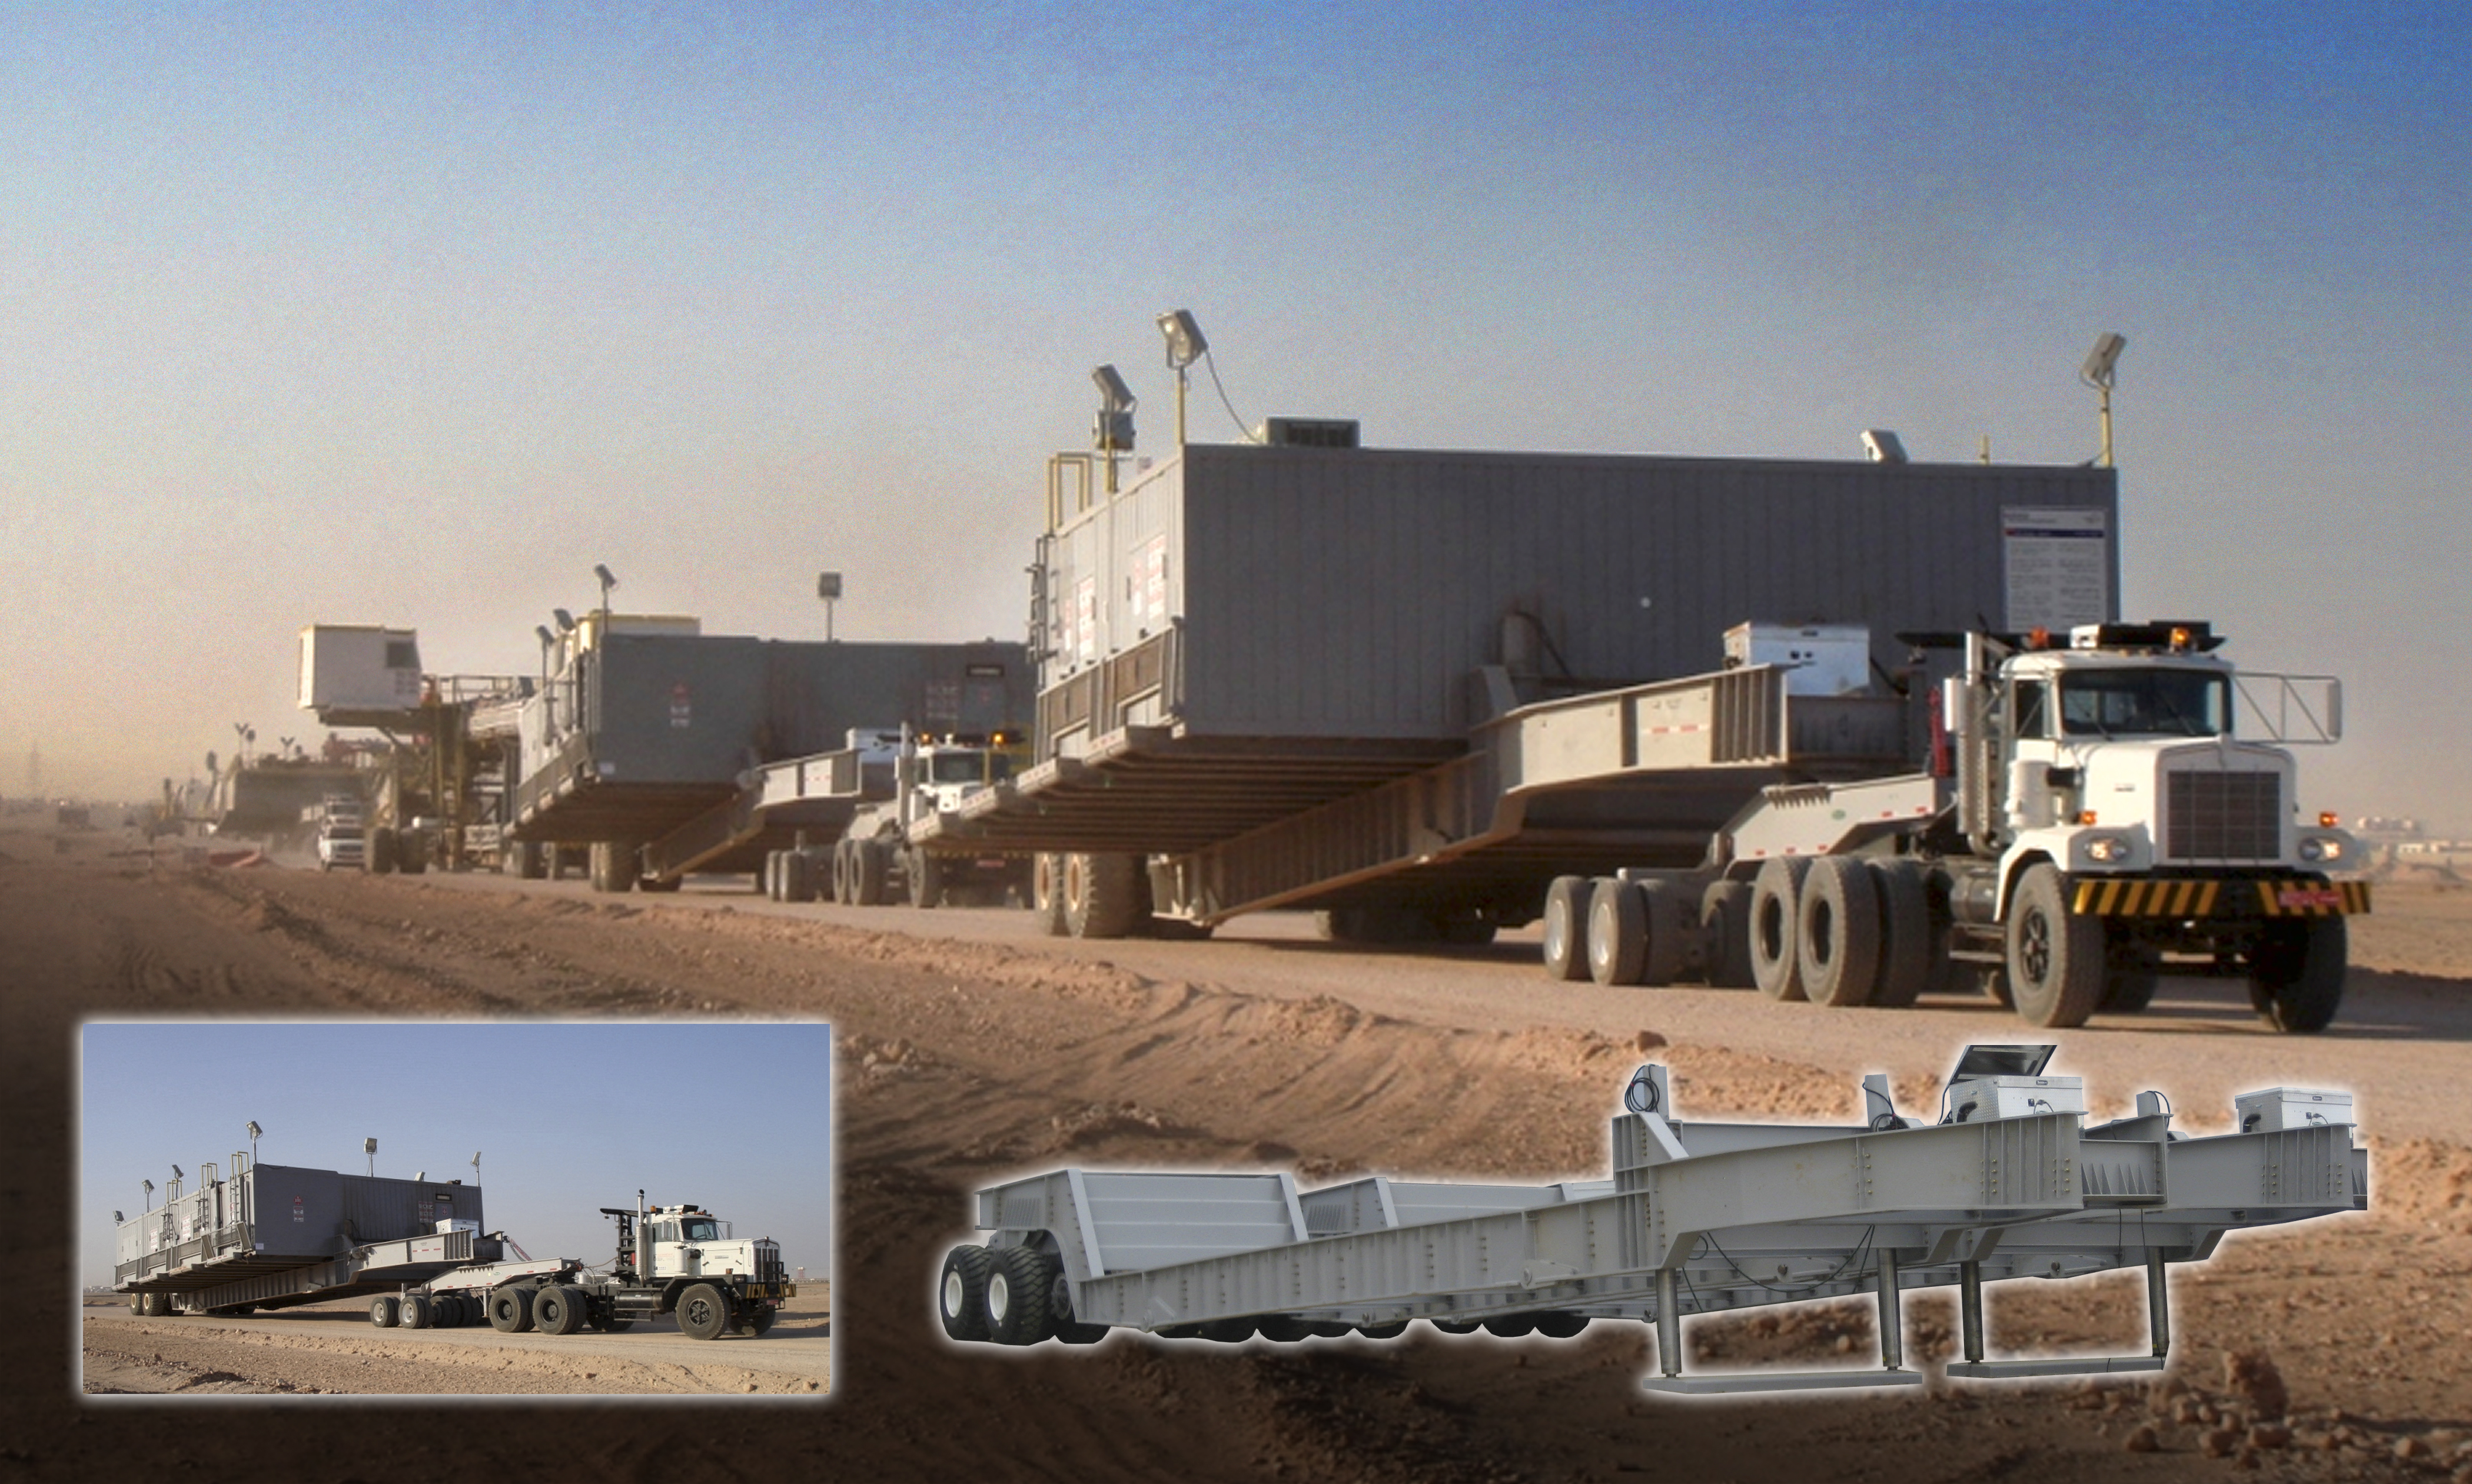 Ensign heavy duty trailers for desert & Middle East well servicing